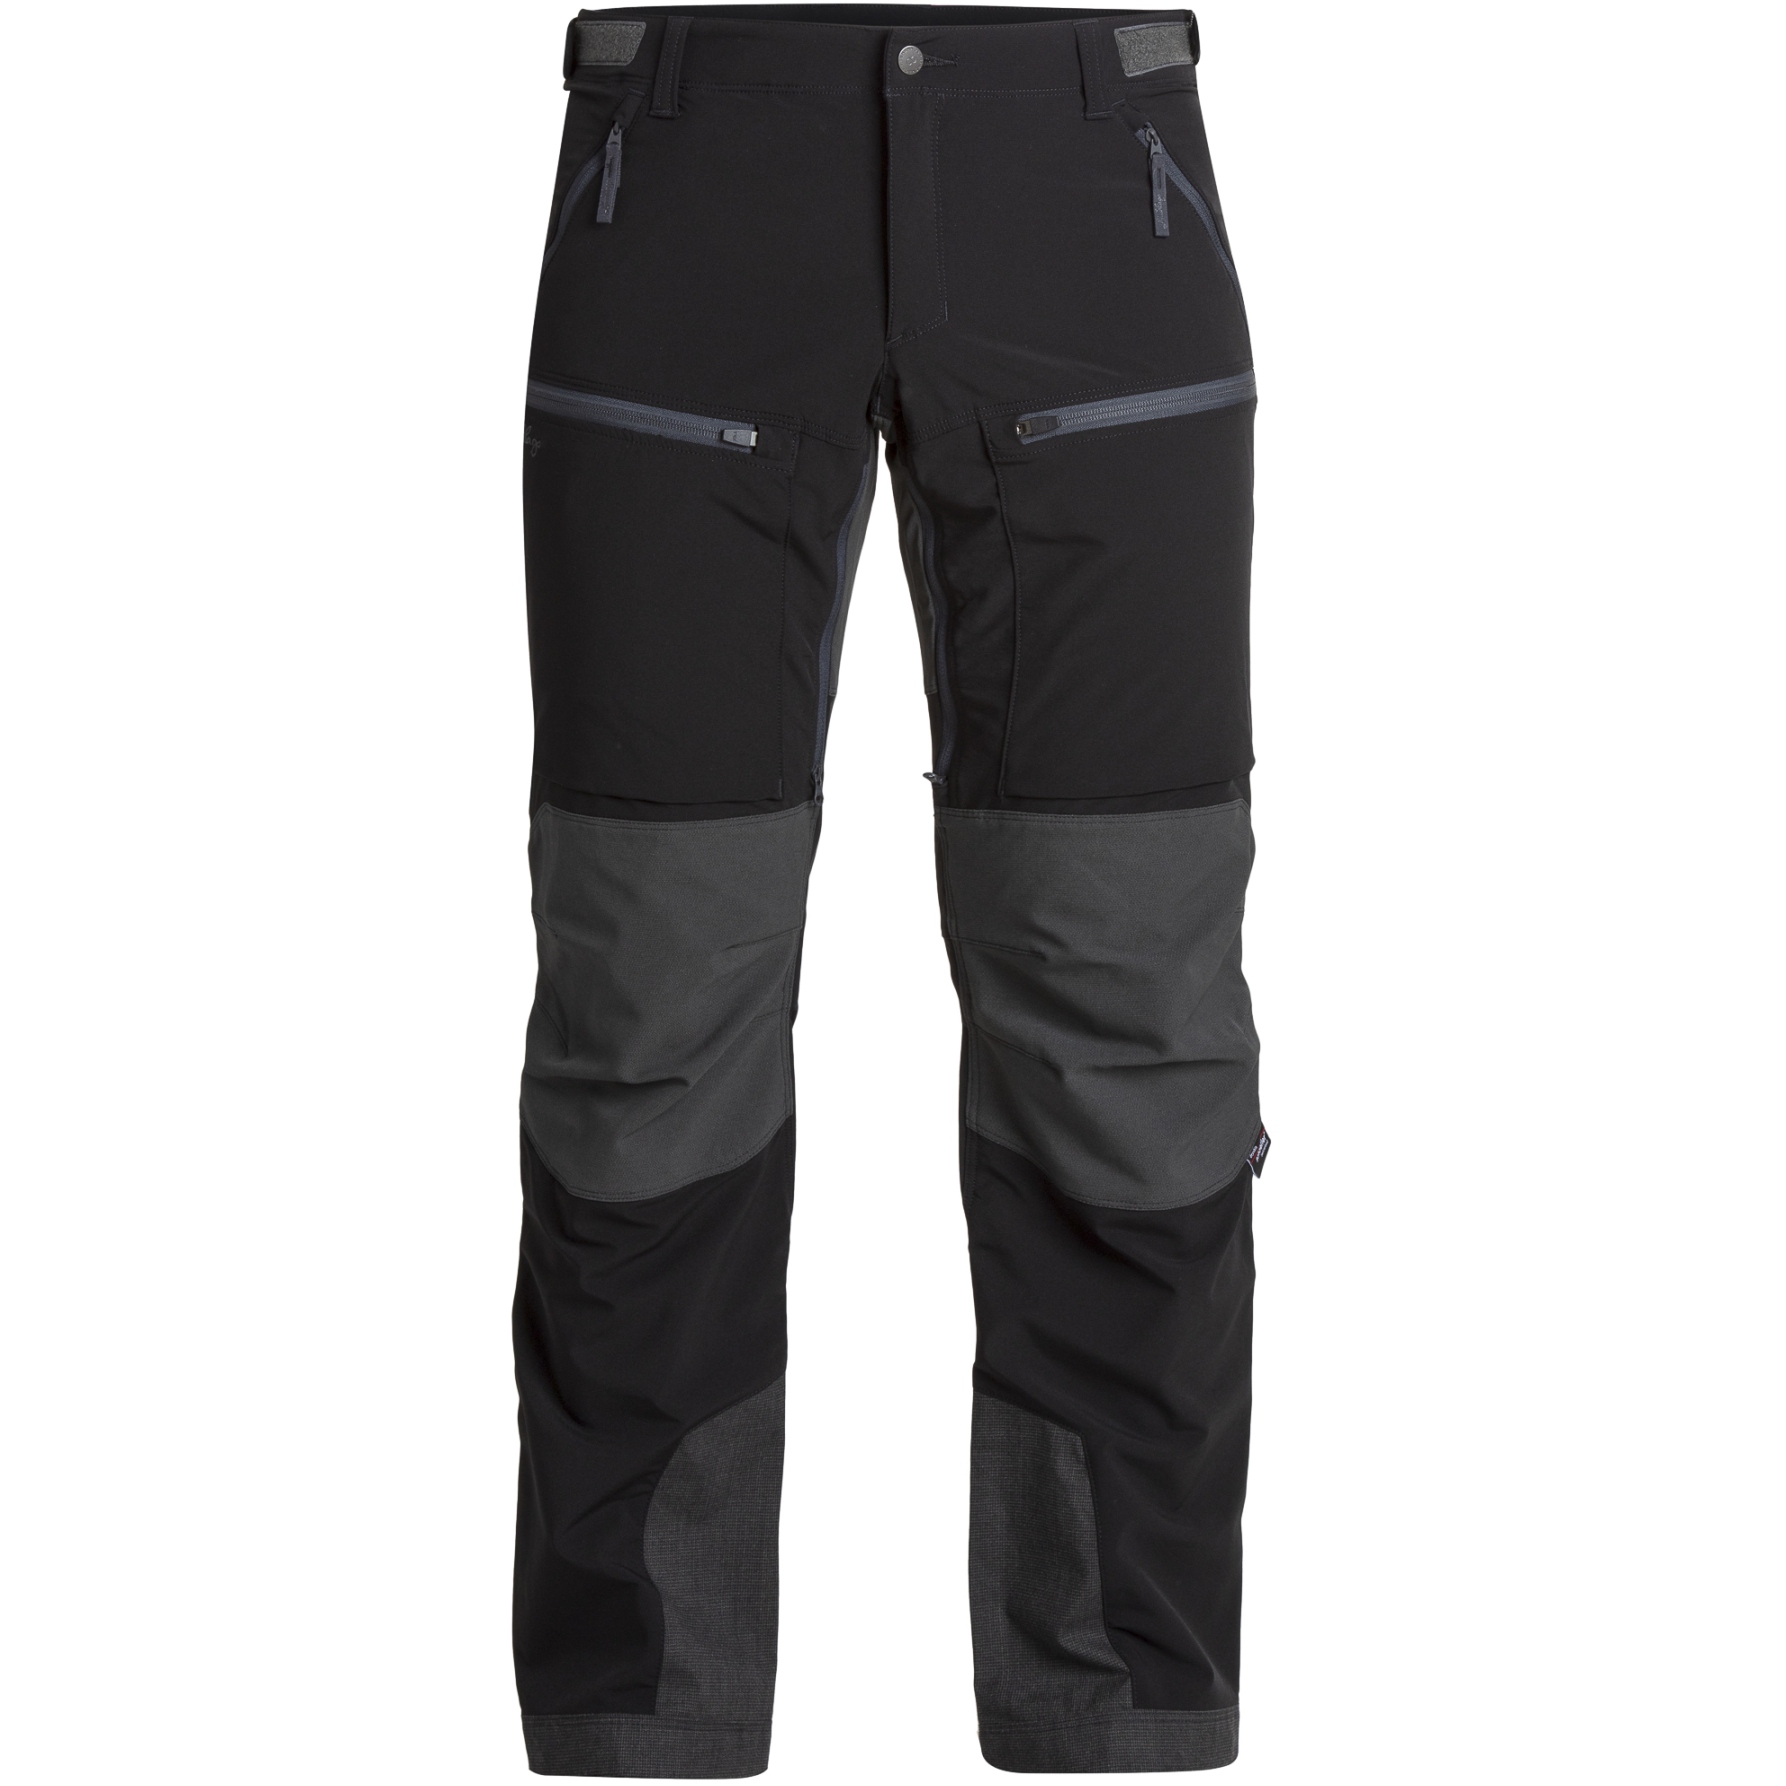 Picture of Lundhags Askro Pro Hiking Pants - Black/Charcoal 916